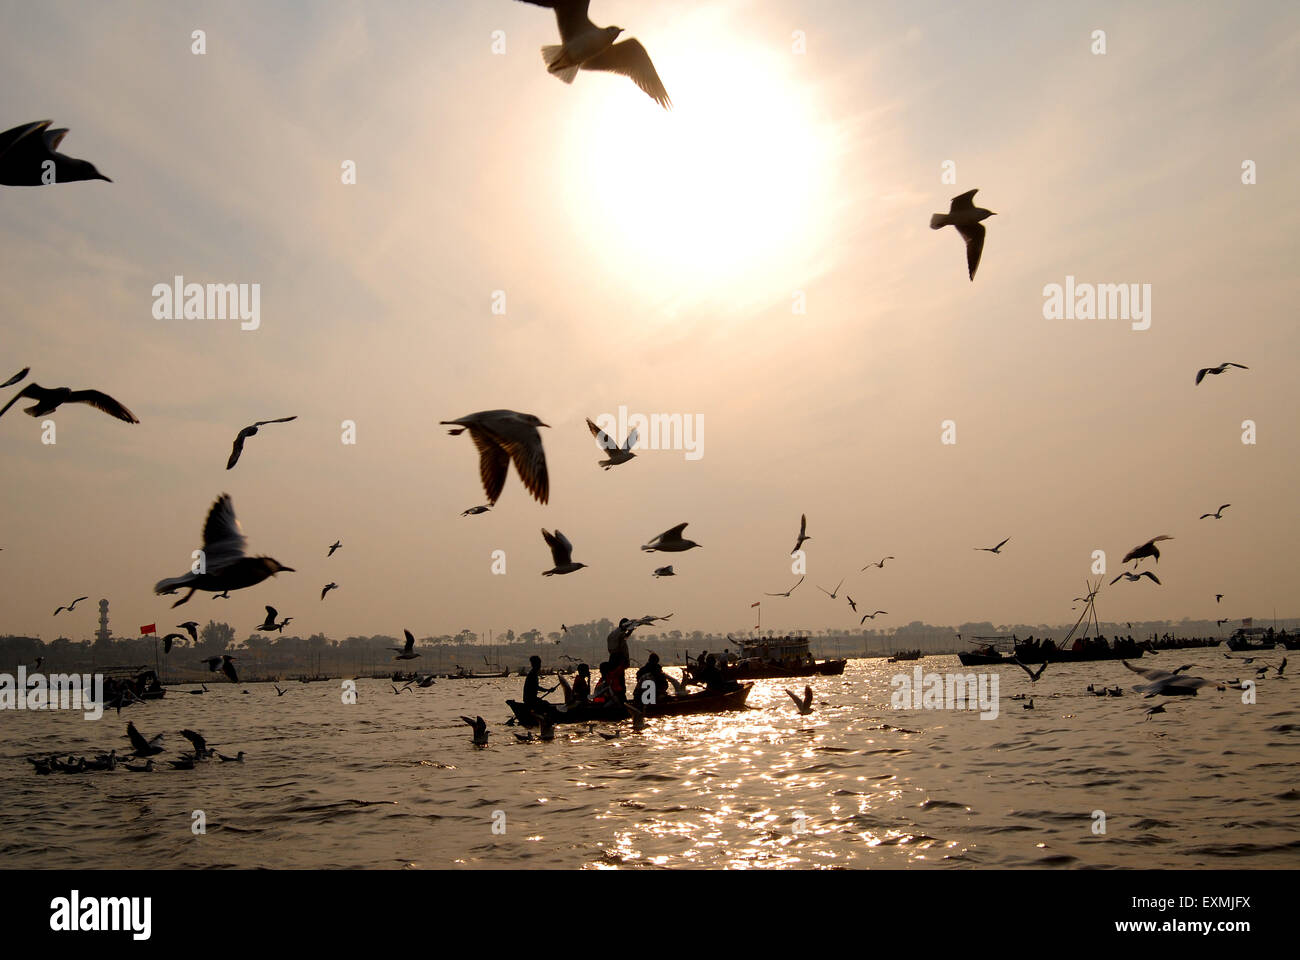 Devotees sit in boat arriving at confluence of Ganges; Yamuna and Saraswati rivers to take holy dip Ardh Kumbh Mela Allahabad Stock Photo